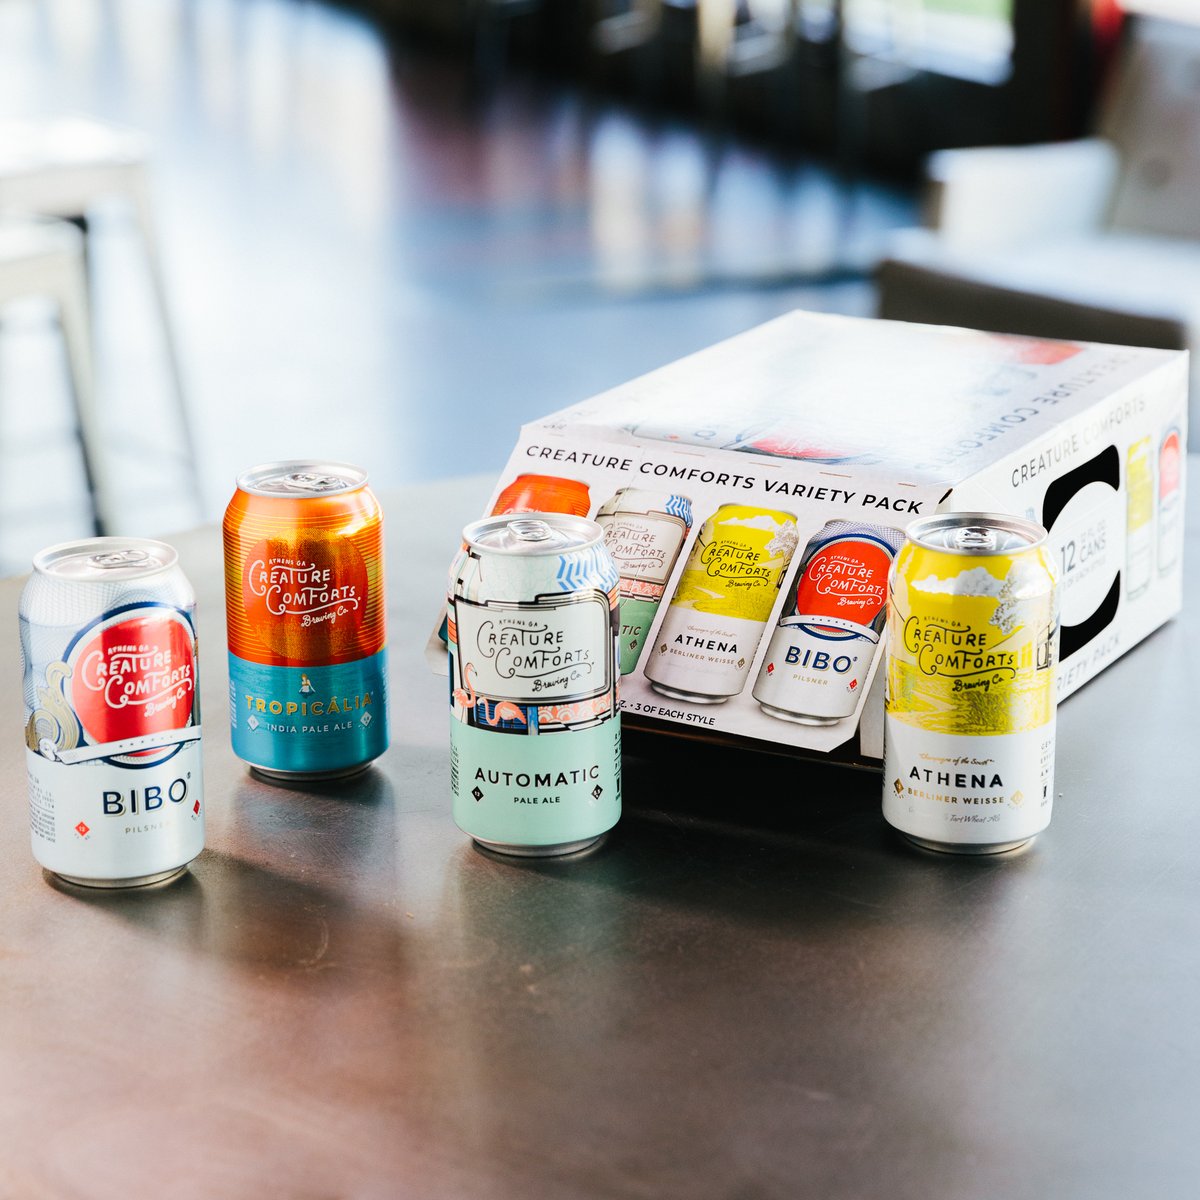 Celebrate this Independence Day with a little variety 🇺🇸 The Creature Comforts Variety Pack brings you 3 each of Tropicália IPA, Automatic Pale Ale, Athena Berliner Weisse and Bibo Pilsner - a little something for everyone!